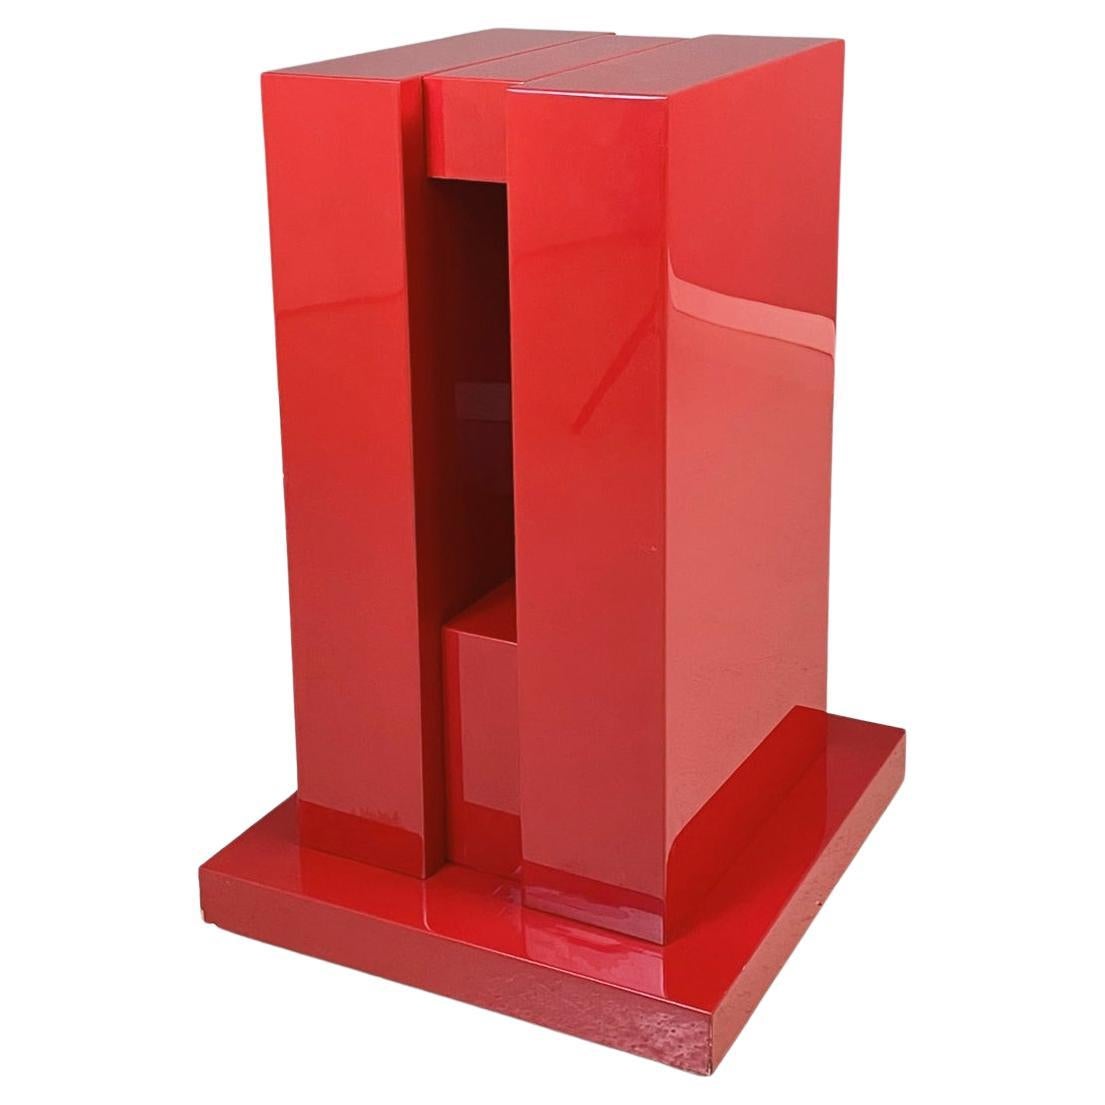 Italian Midcentury Geometric Pedestal in Red Lacquered Wood, 1980s